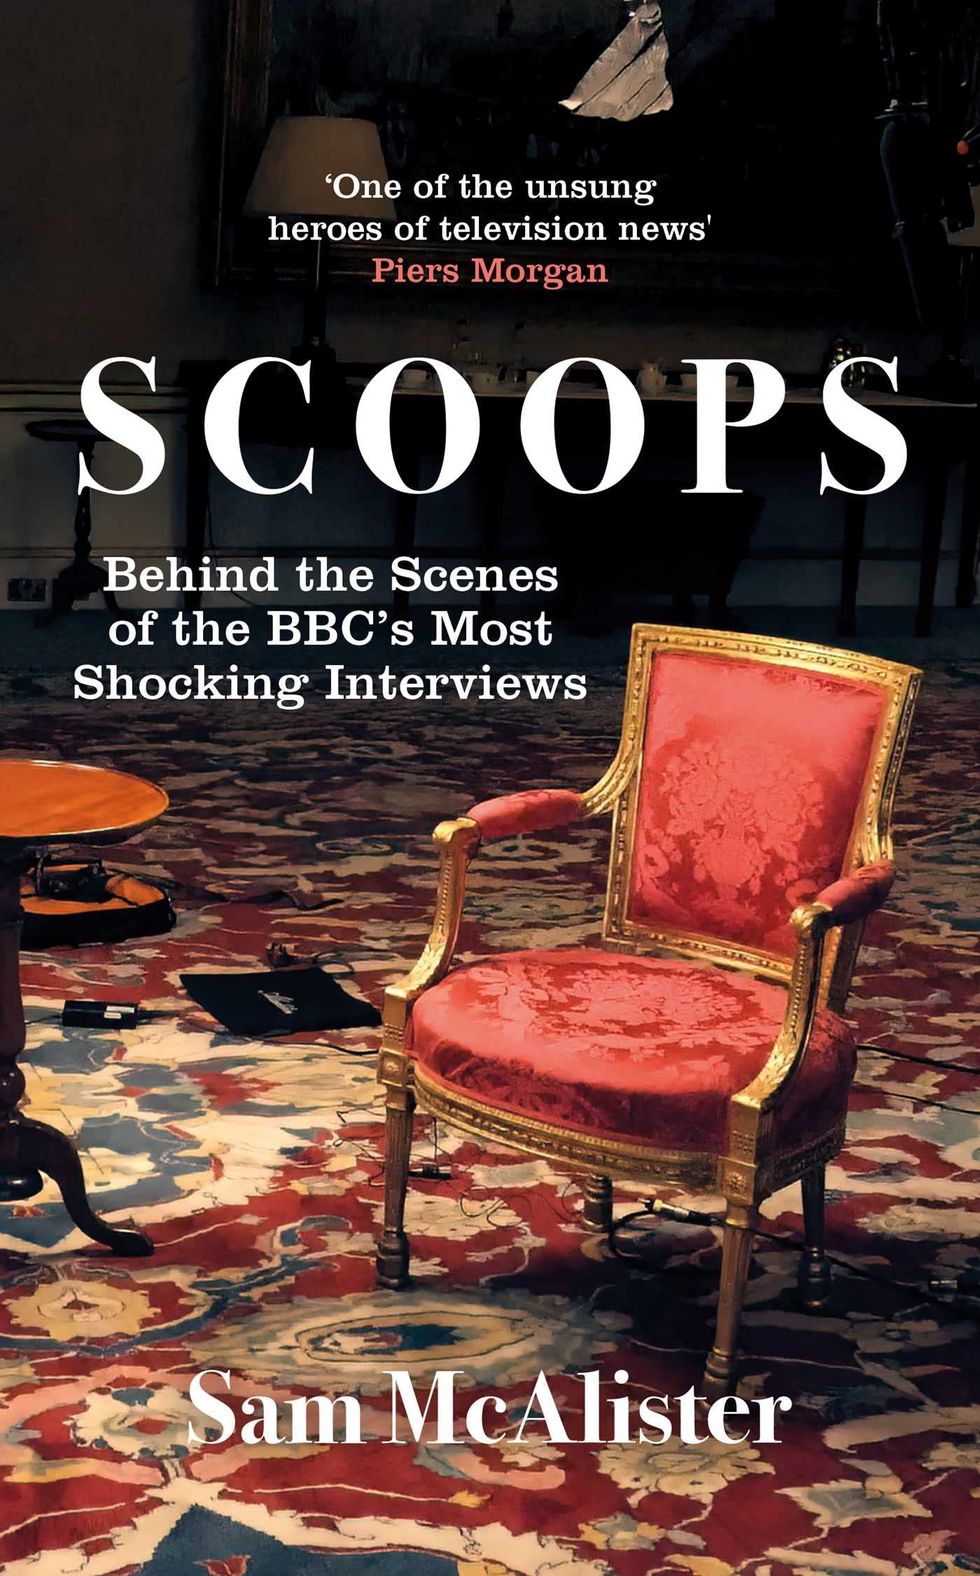 Scoops by Sam McAlister